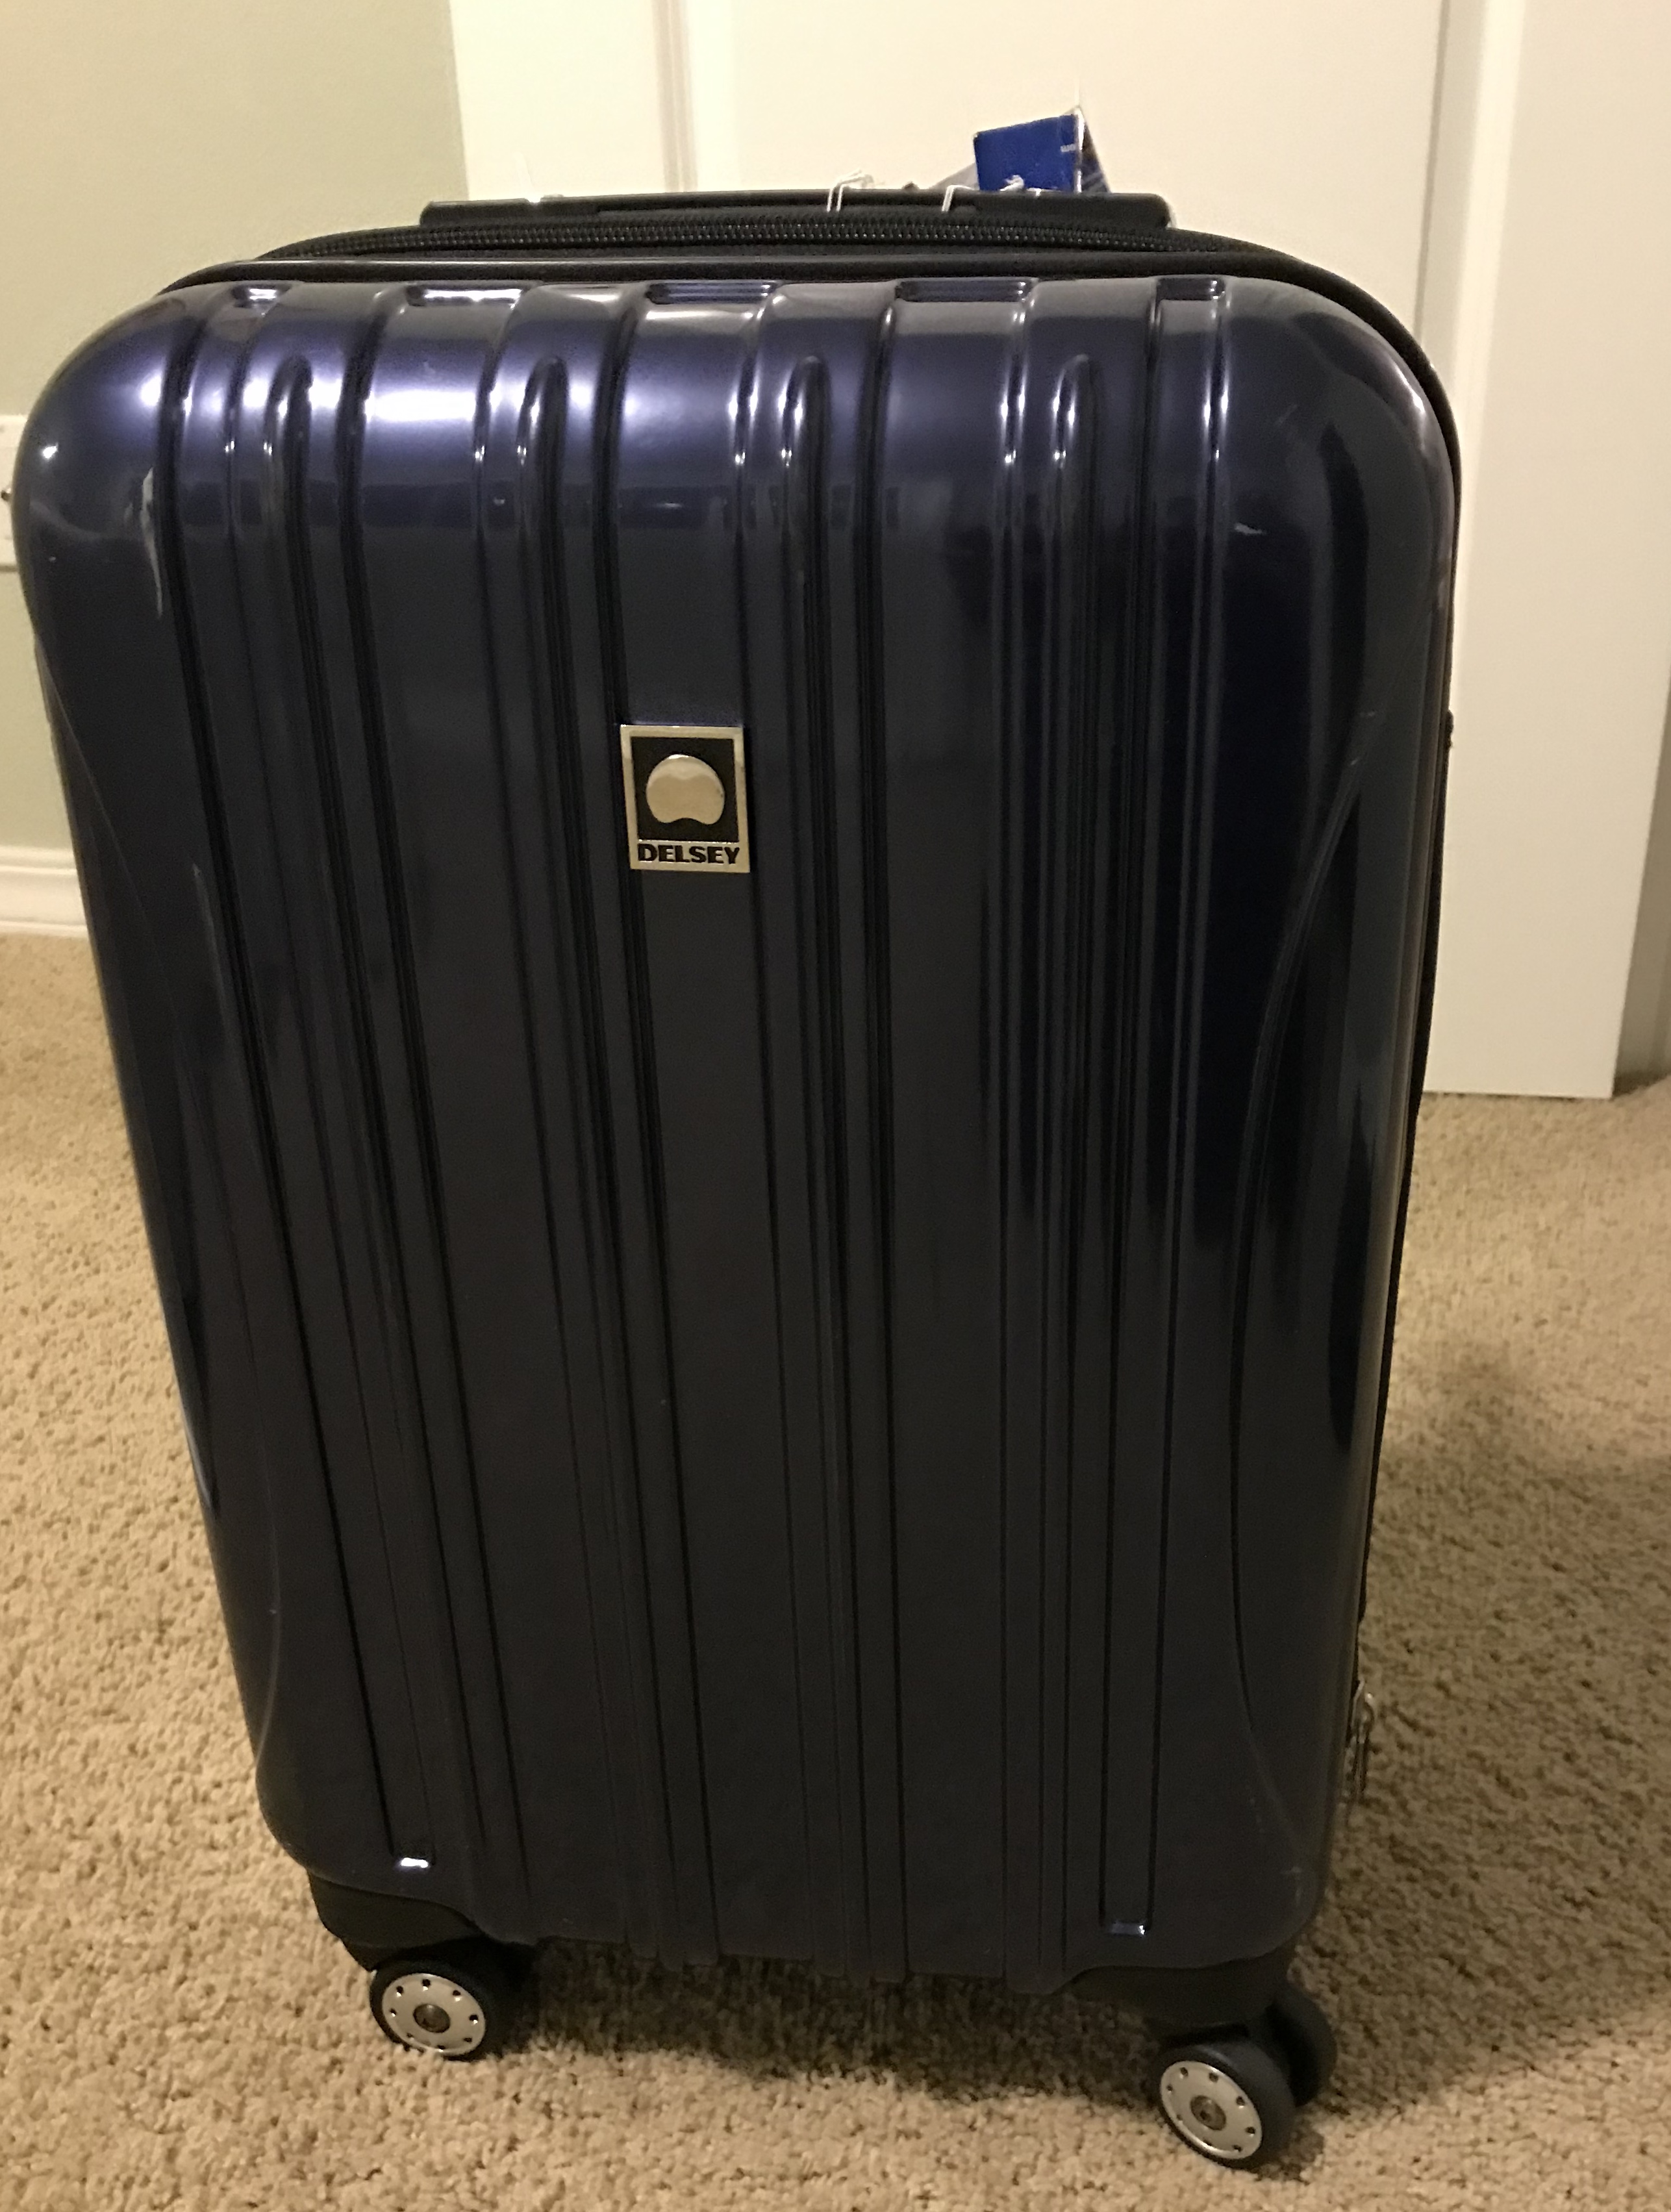 Delsey luggage at Amazon